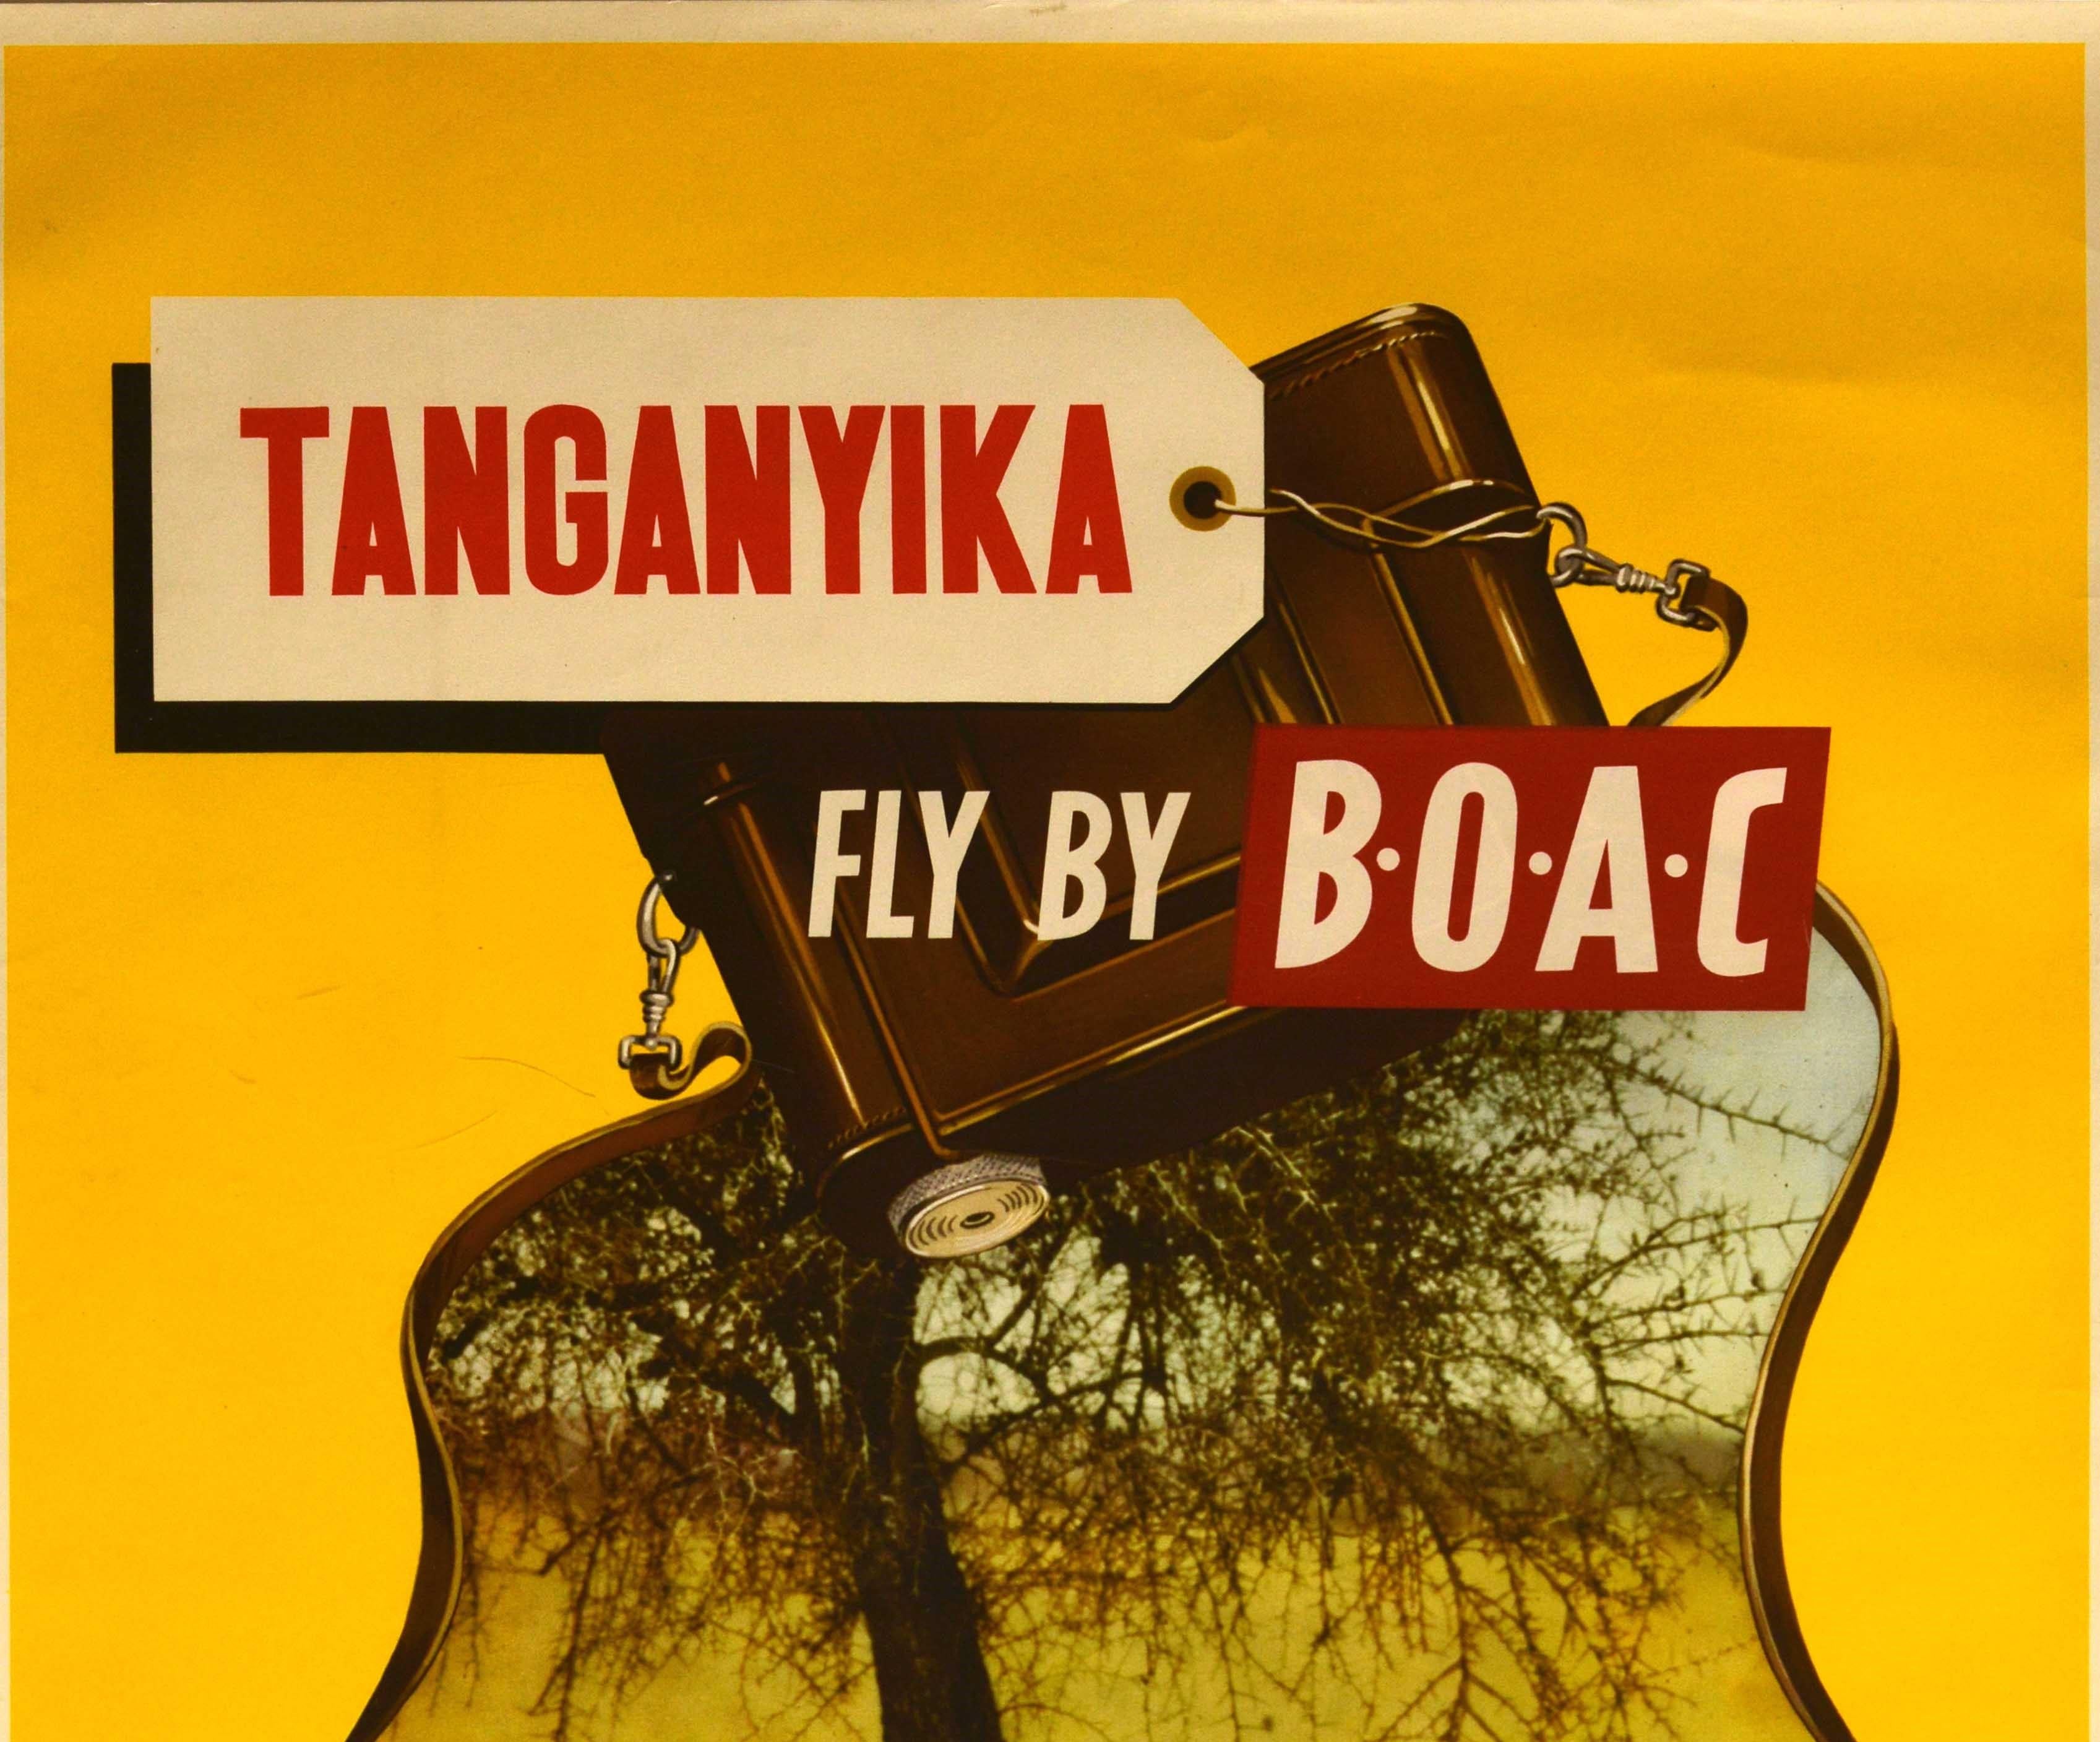 Original Vintage Poster Tanganyika Fly By BOAC Africa Holiday Lion Safari Travel - Print by Unknown